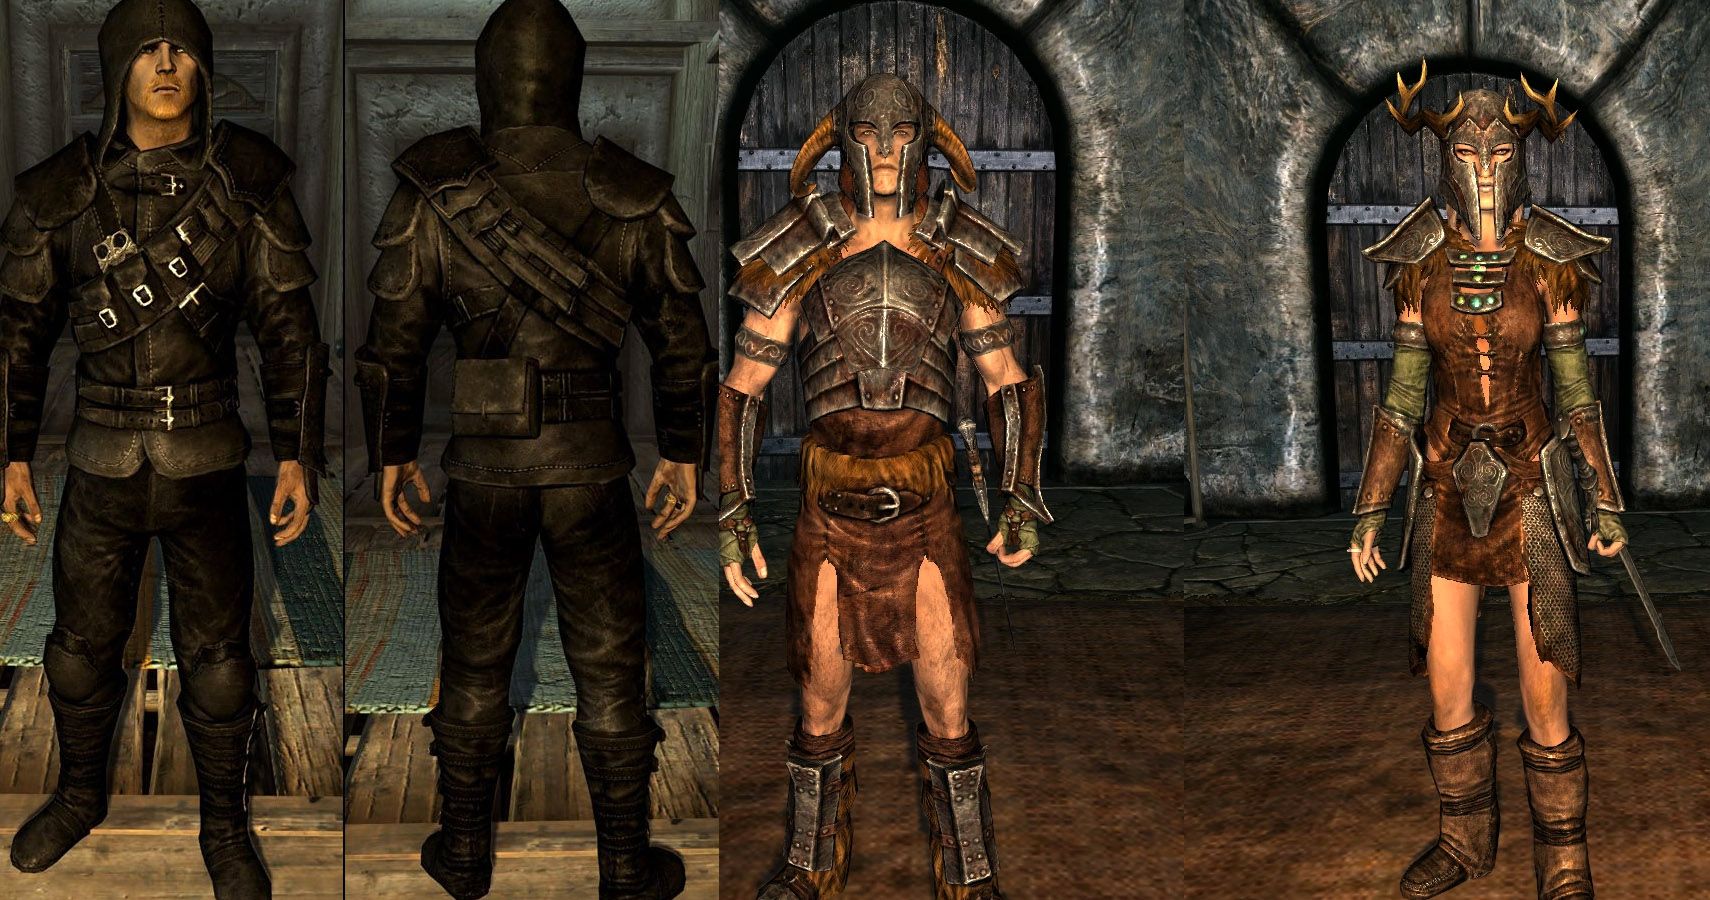 Skyrim: 10 Best Armor Sets & How To Find Them